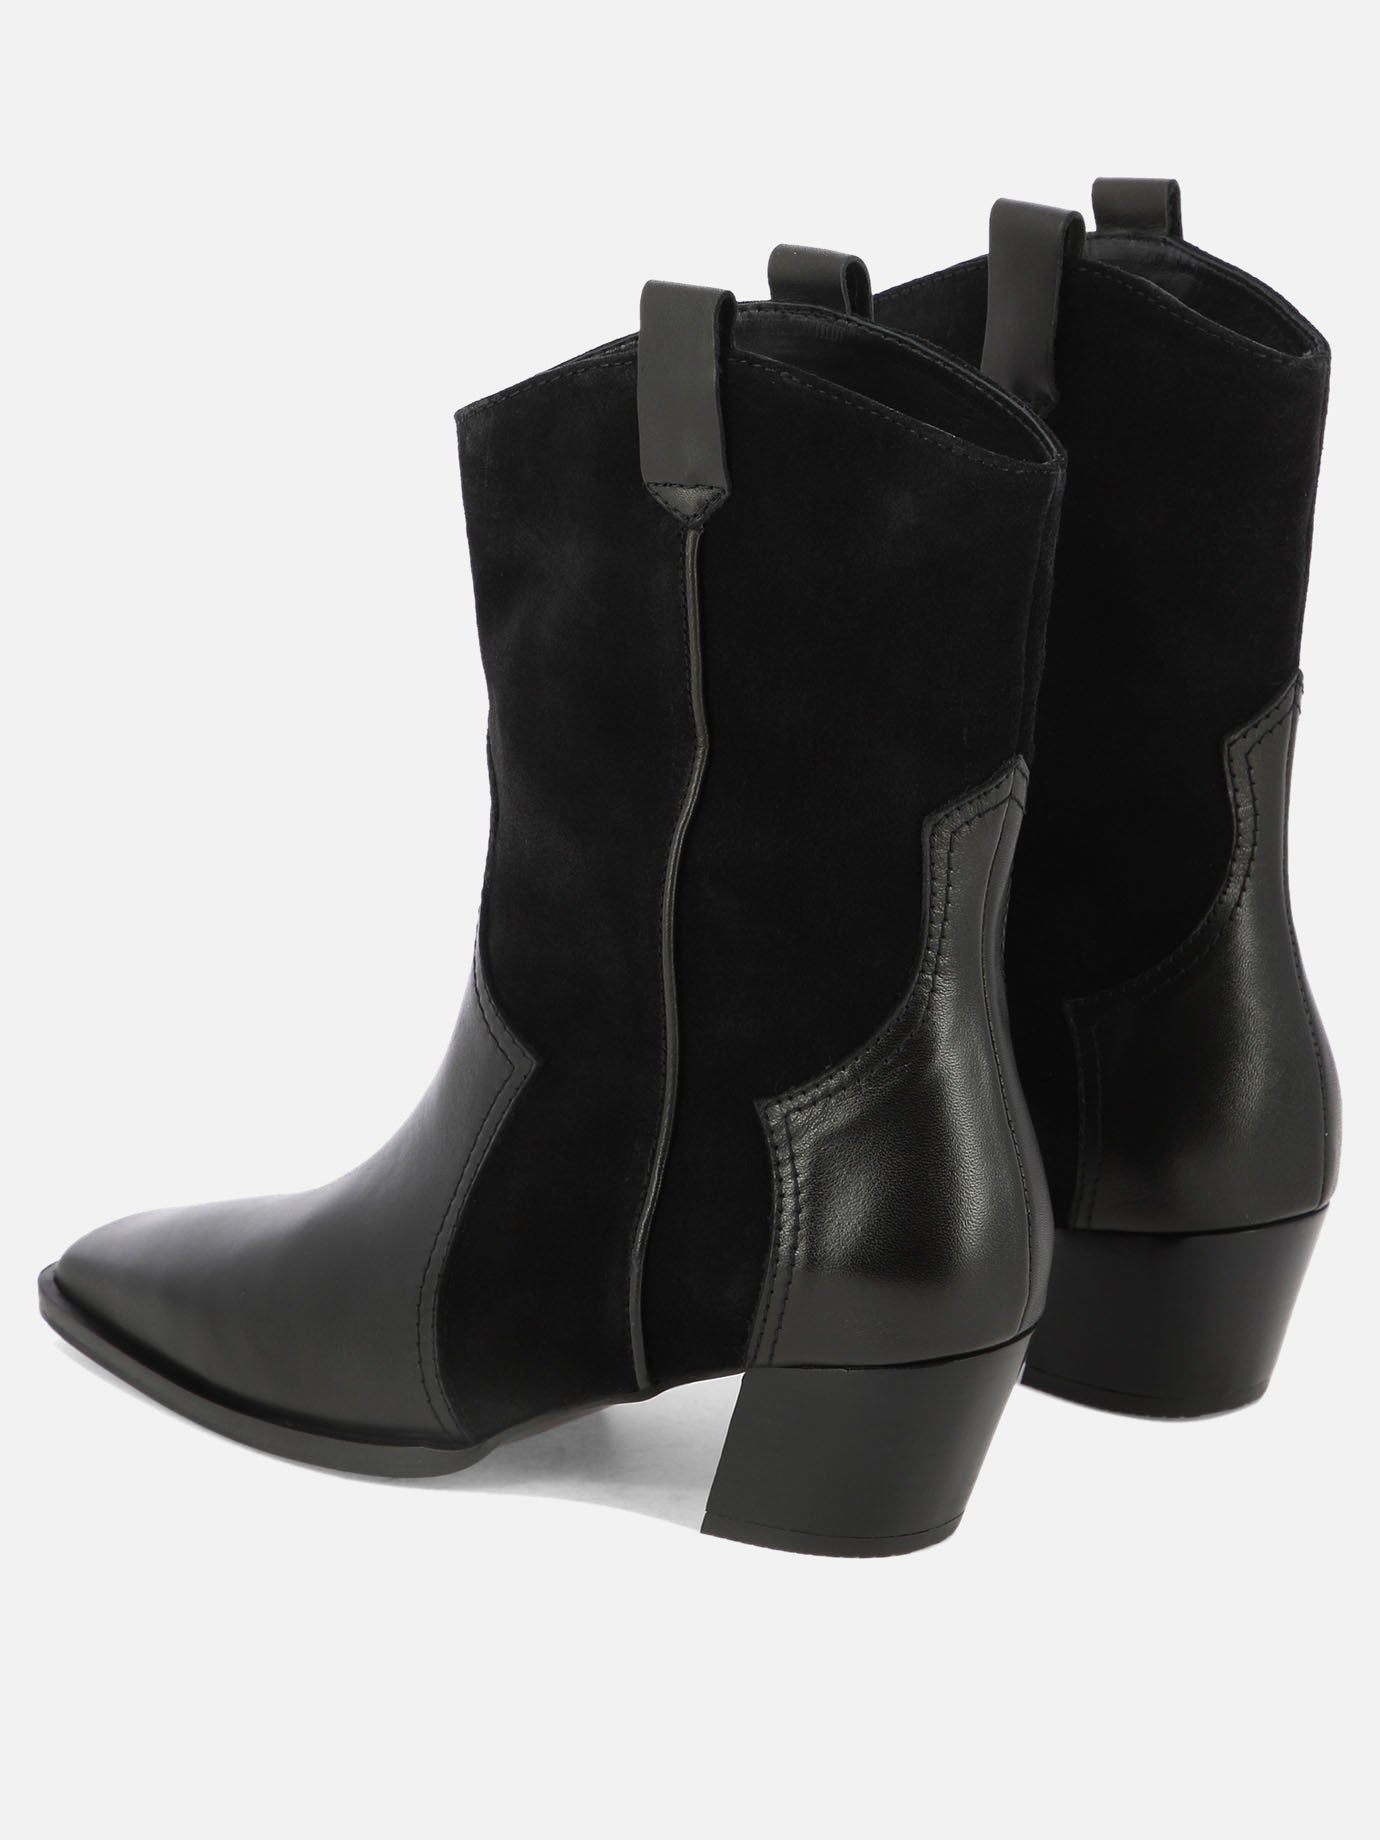 "Denise" ankle boots